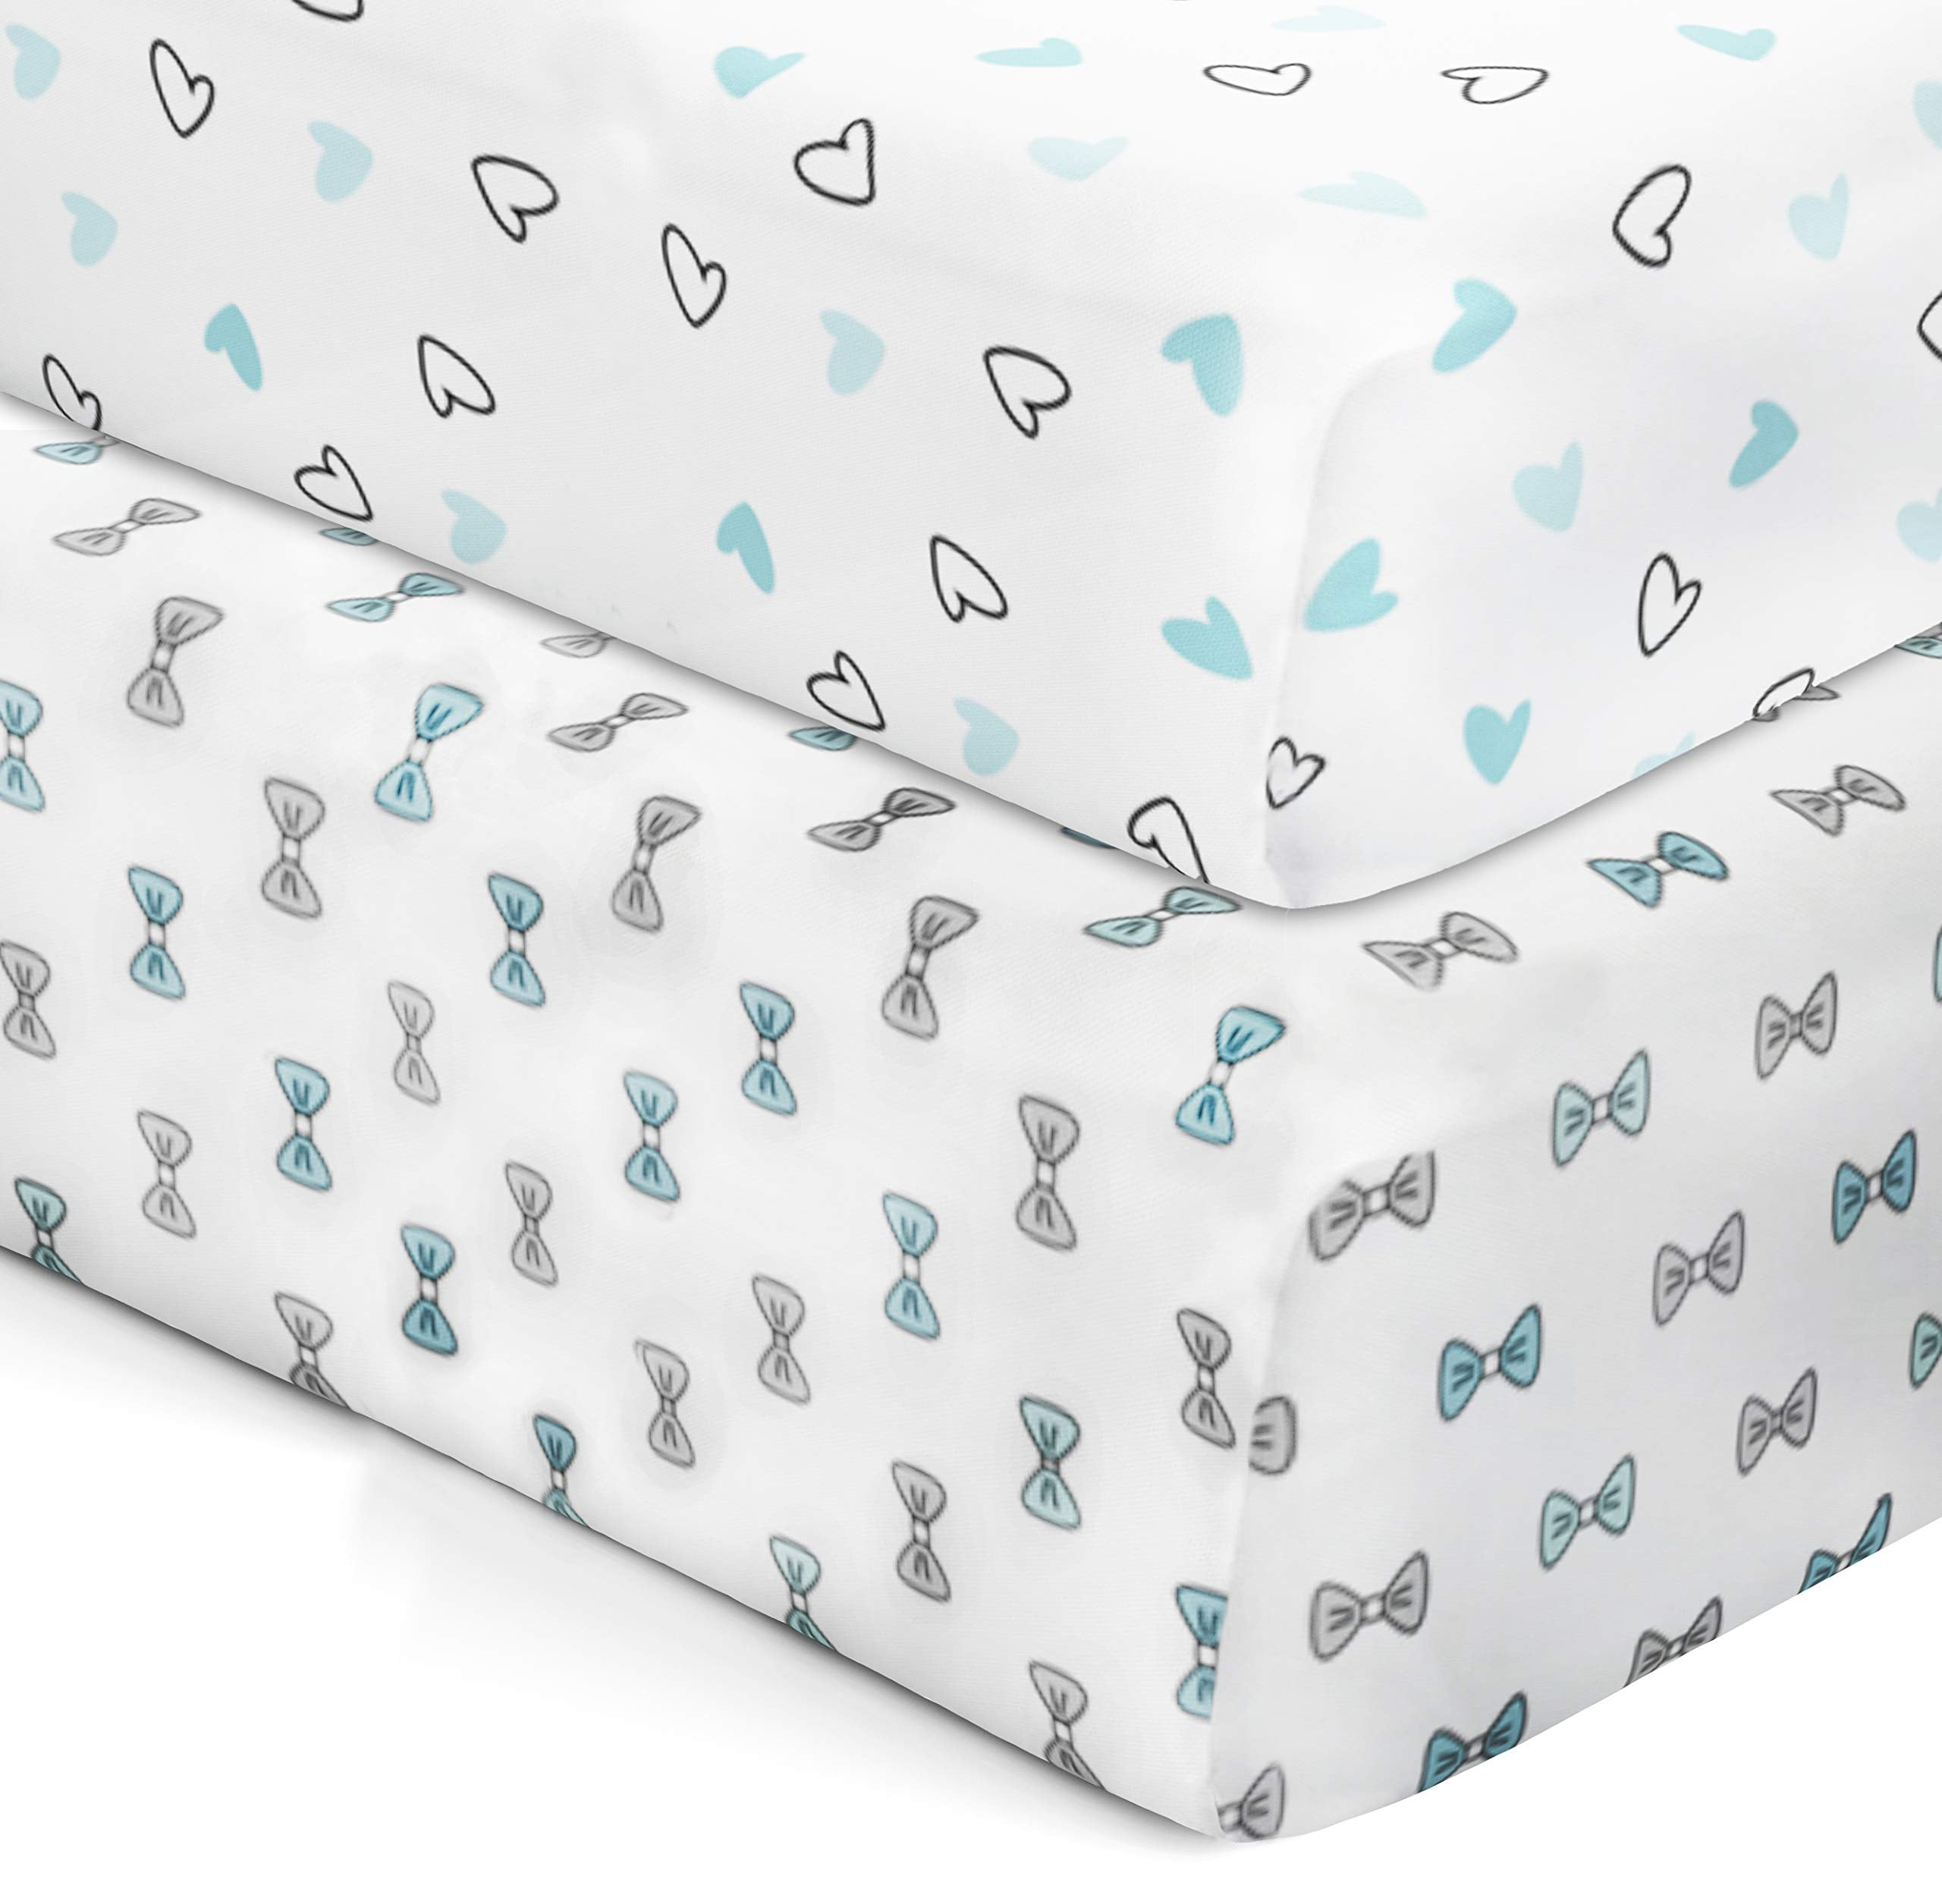 The White Cradle Flat Bed Sheet for Baby Cot & Mattress (2 pcs pack) - Blue Hearts and Bows